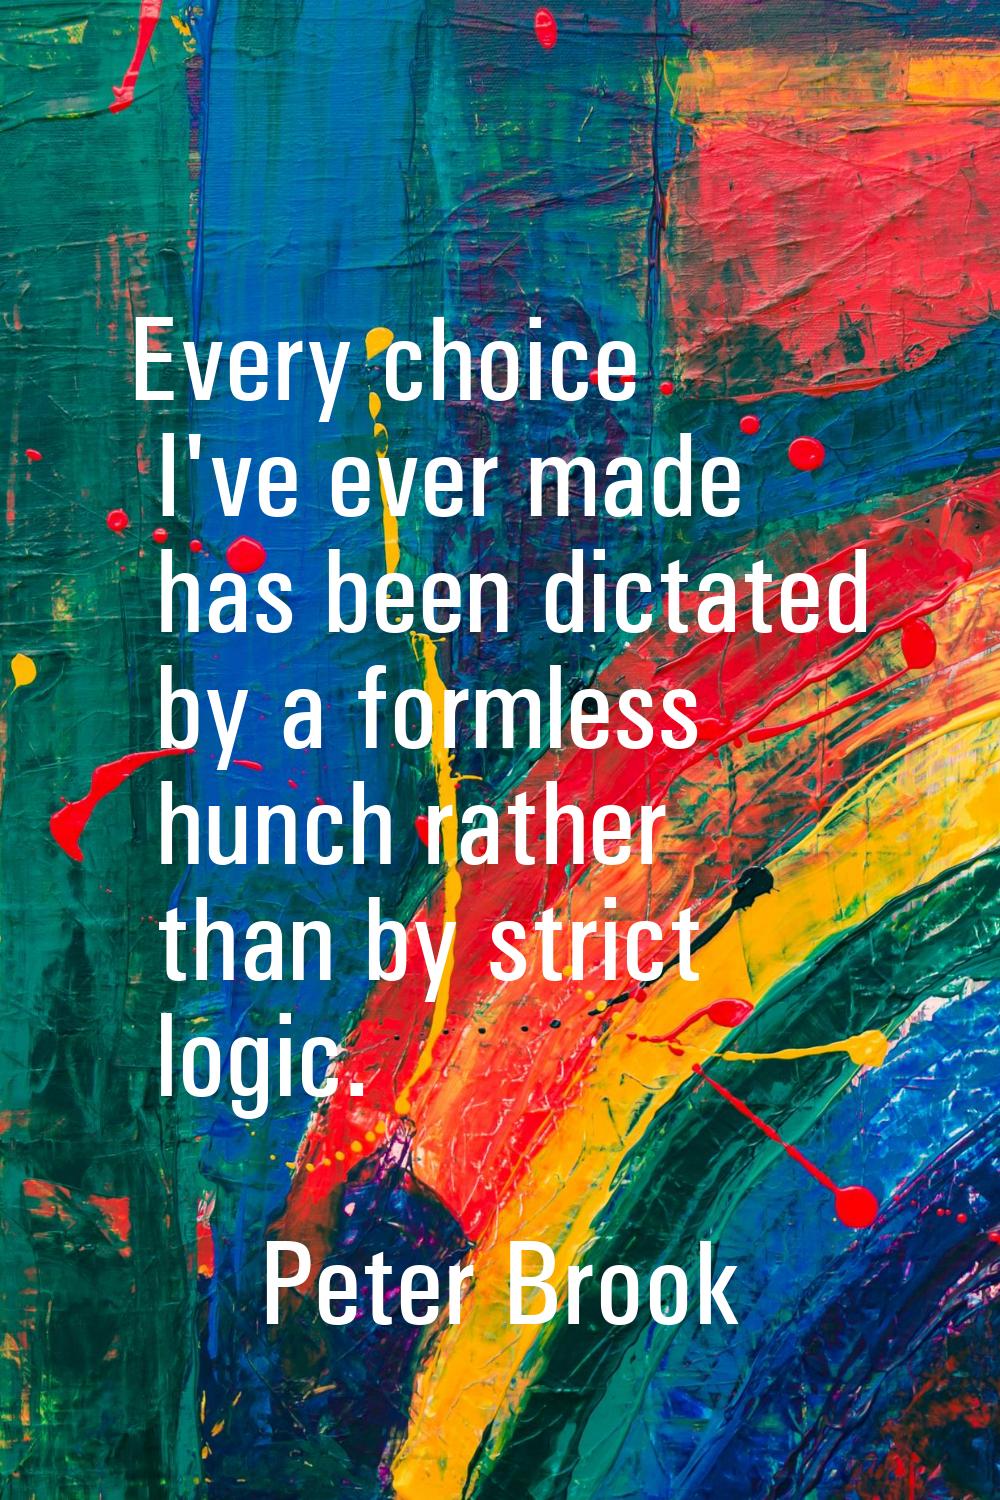 Every choice I've ever made has been dictated by a formless hunch rather than by strict logic.